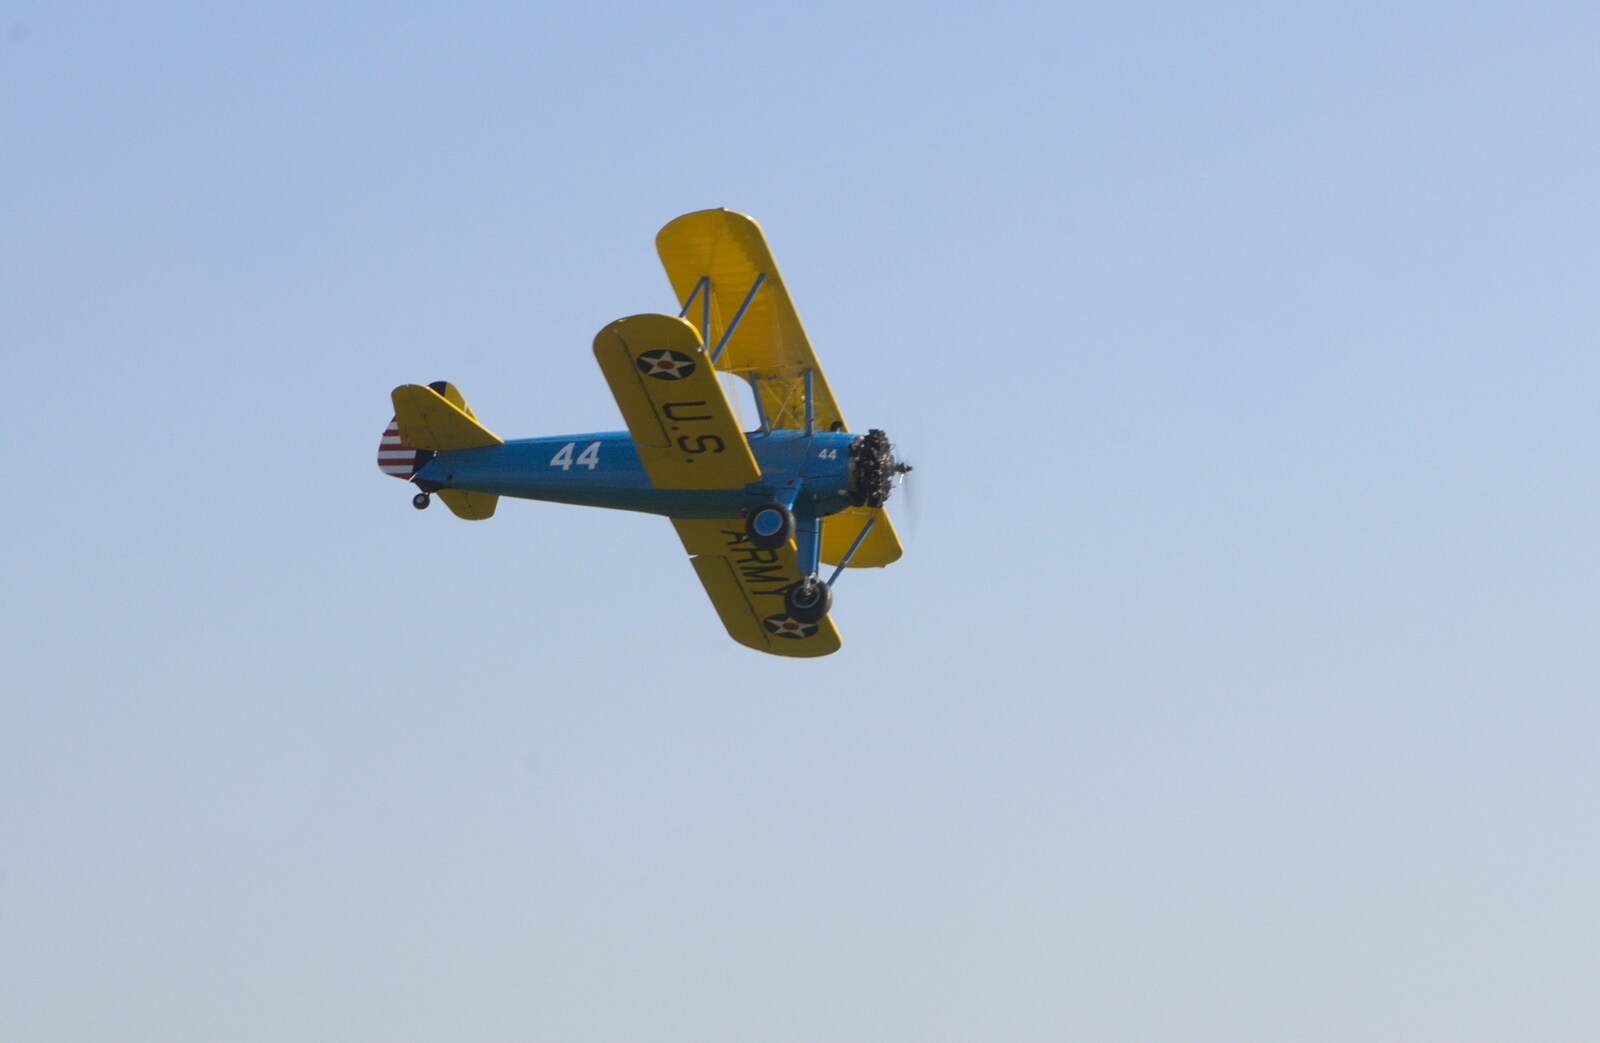 Stearman in flight from A Day Out at Duxford, Cambridgeshire - 9th March 2014